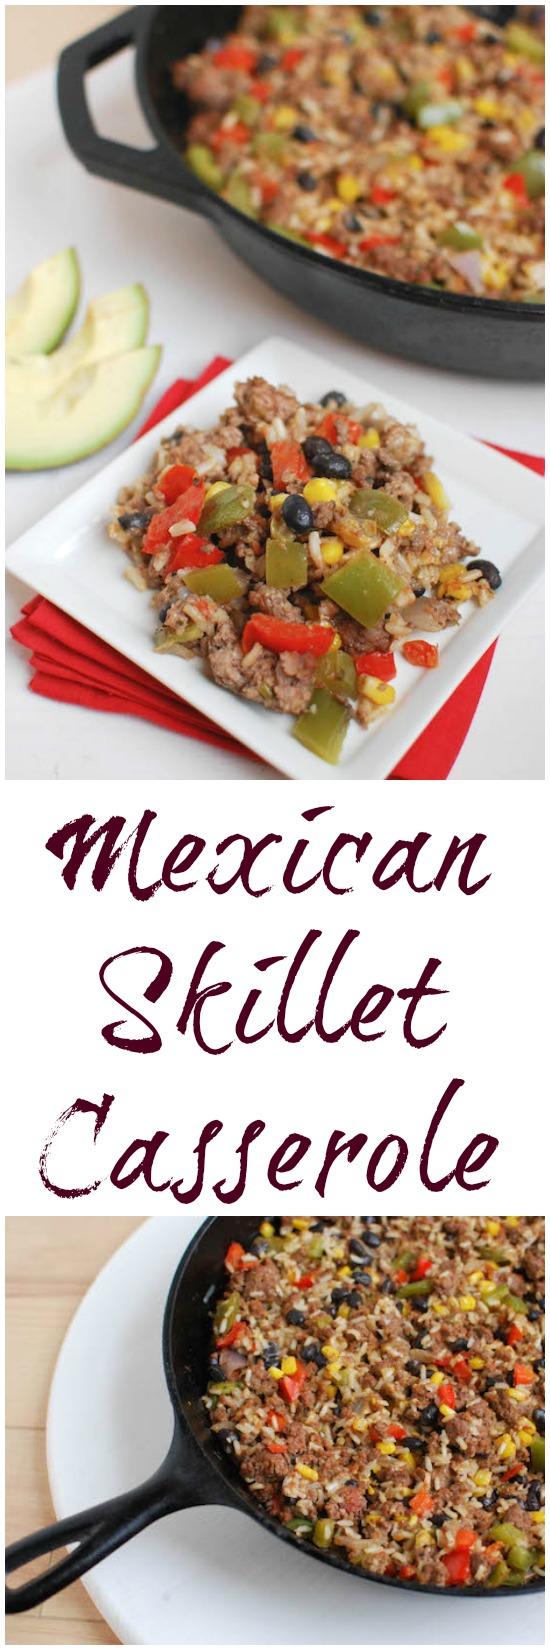 This Mexican Skillet Casserole is the perfect one pan meal for a busy weeknight dinner.